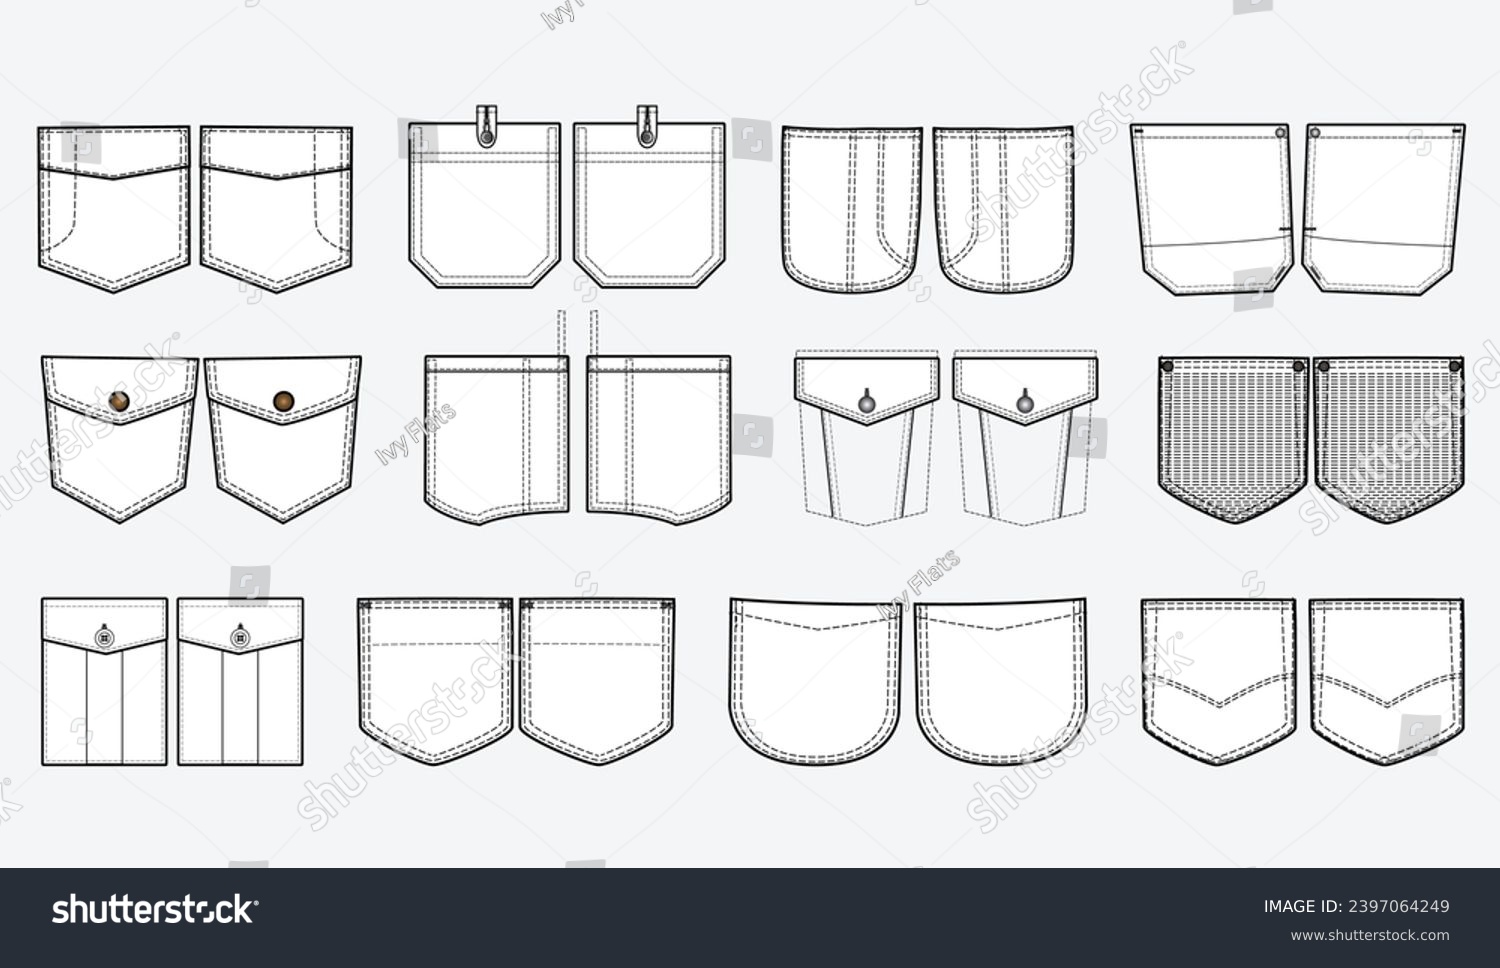 SVG of Jeans and denim Patch pocket flat sketch vector illustration set, different types of Clothing Pockets for jeans pocket, sleeve arm, cargo pants, dresses, bag, garments, Clothing and Accessories svg